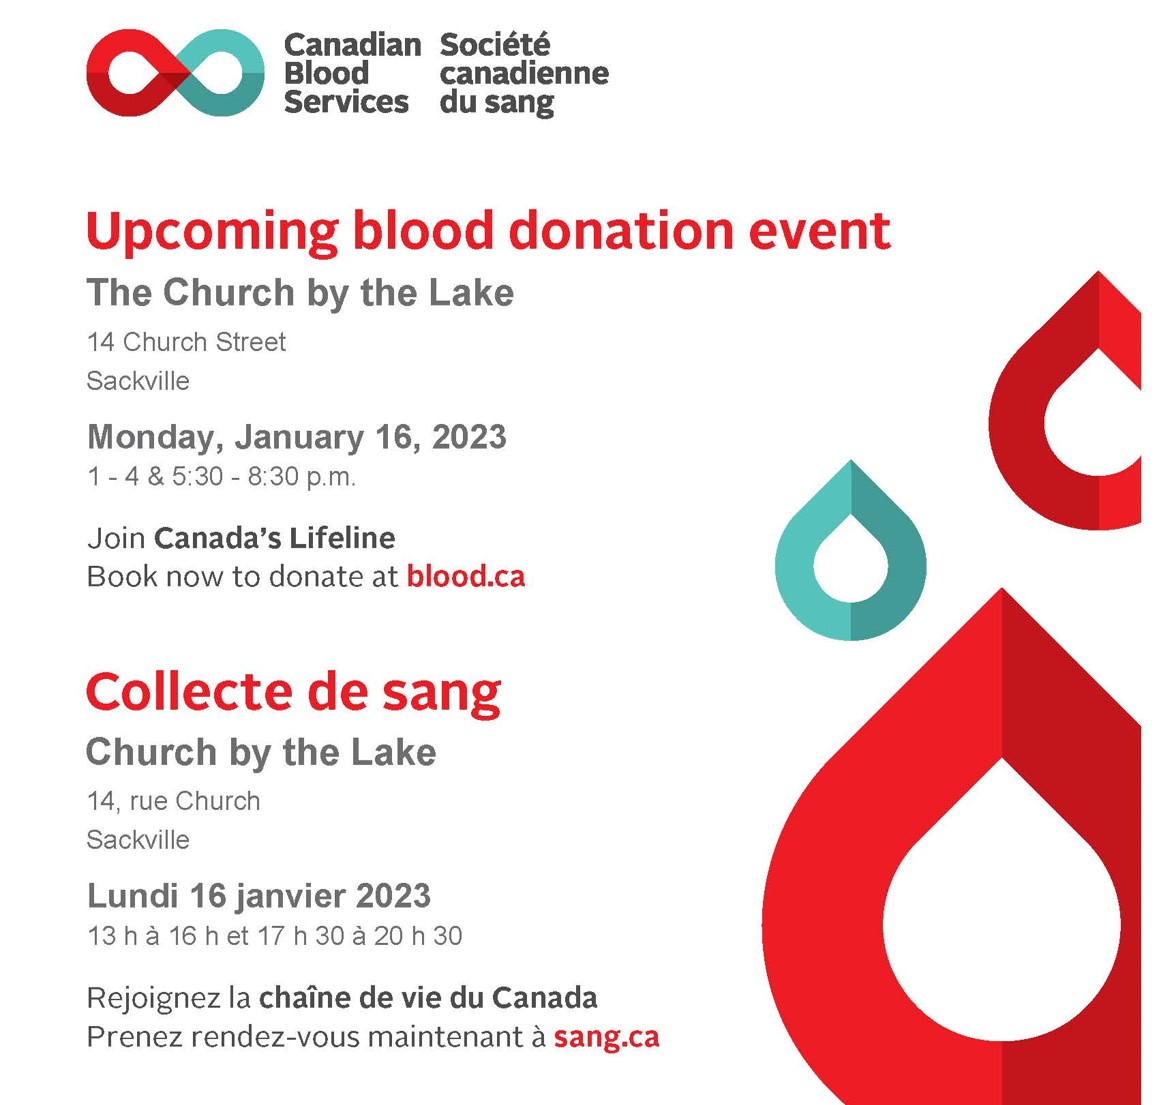 Blood donation event Monday, January 16, 2023 at the Church by the Lake (14 Church Street). Hours are 1-4pm and 5:30-8:30pm. You can book to donate at blood.ca.